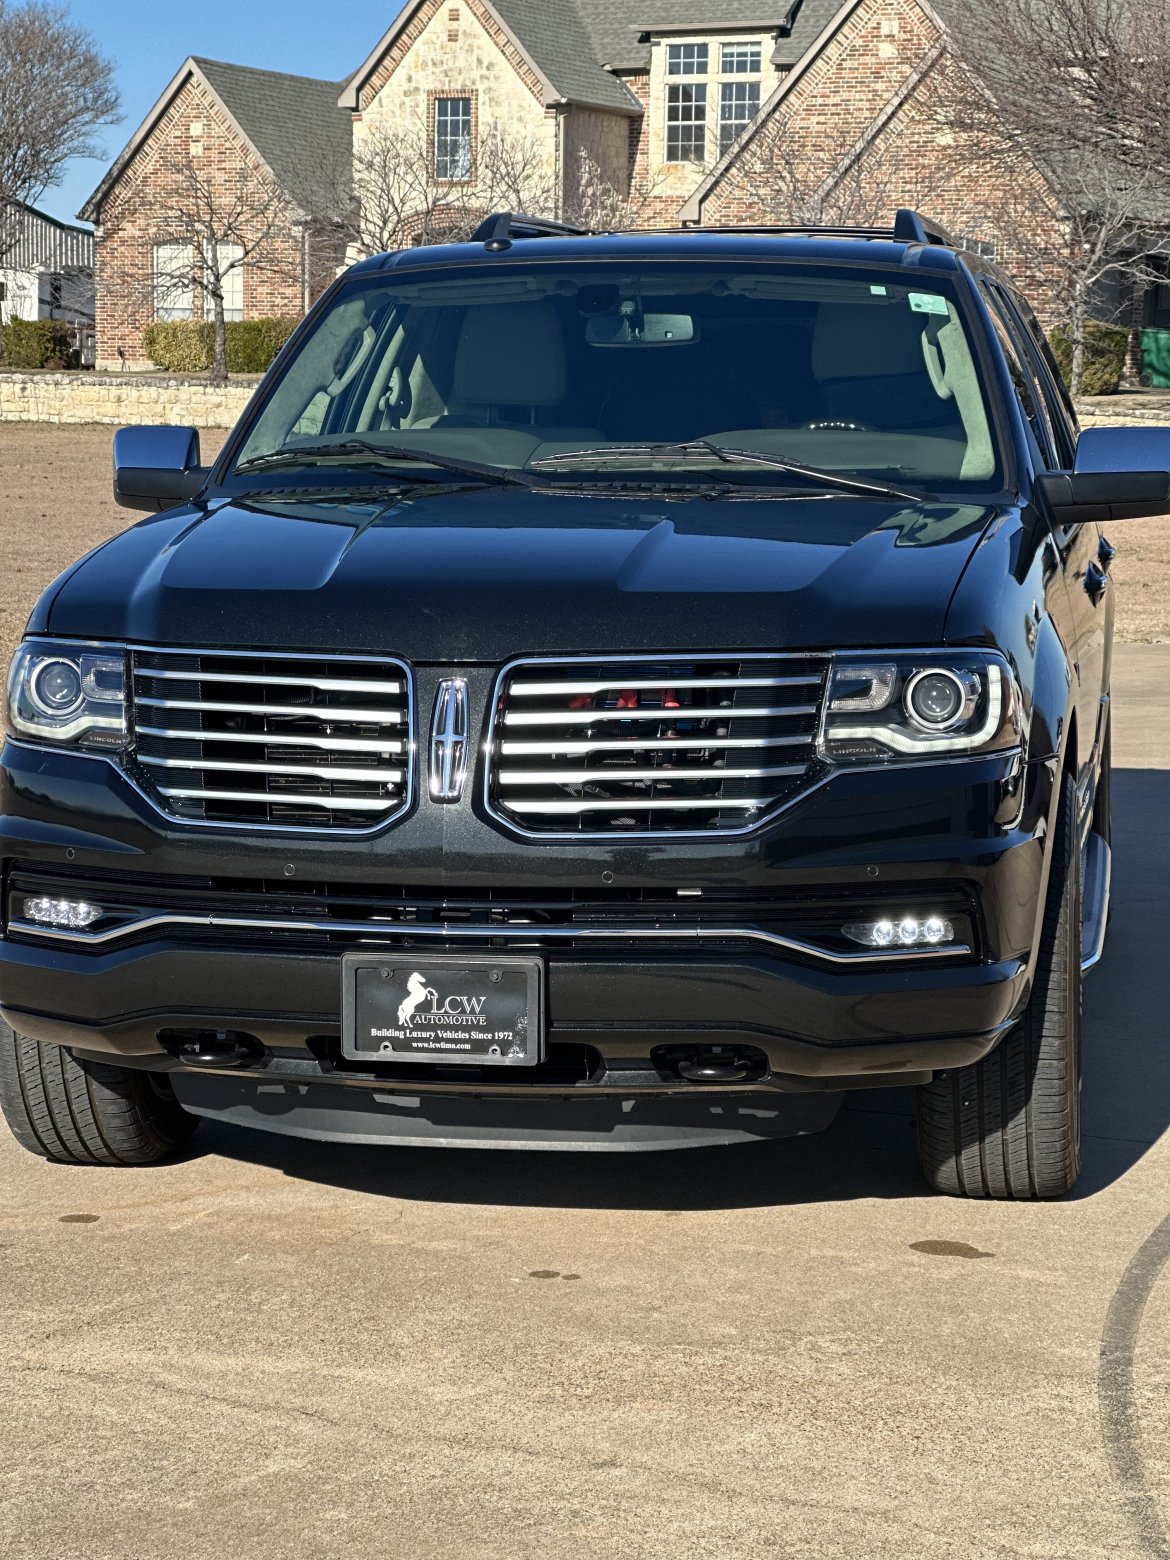 Exotic for sale: 2015 Lincoln Executive Navigator by LCW